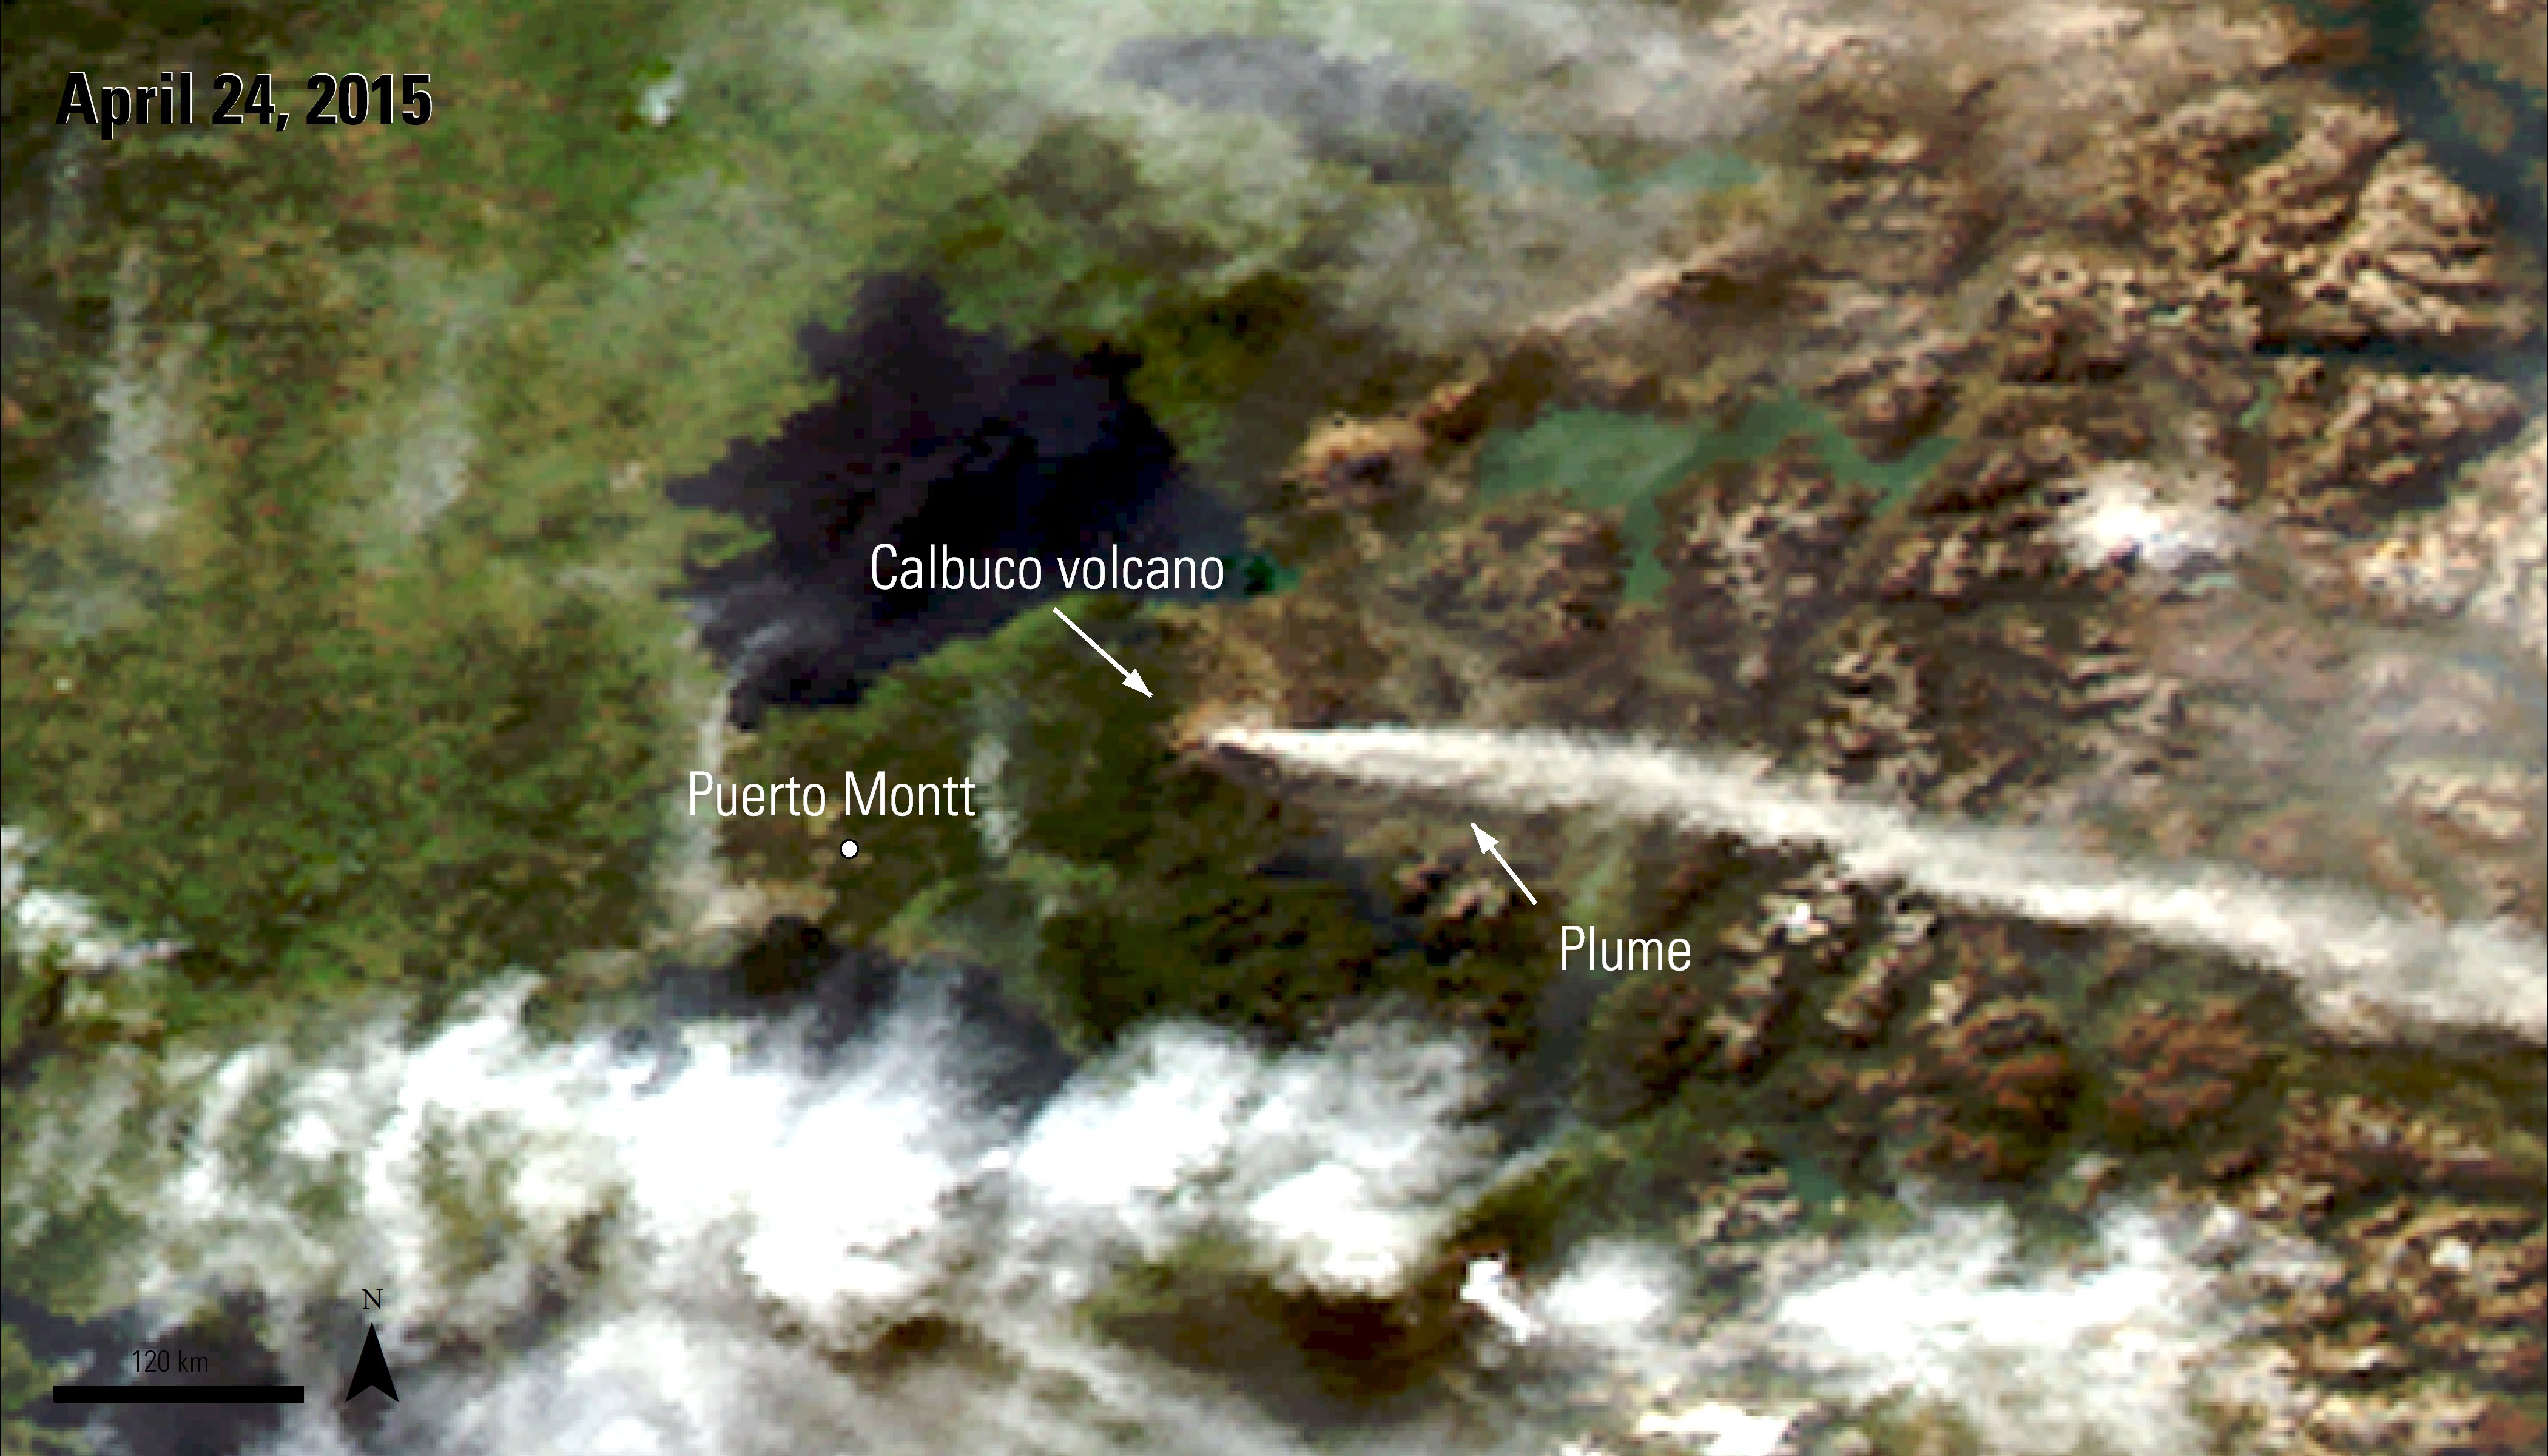 Terra MODIS Surface Reflectance imagery over the Calbuco volcano, Chile, during an eruption with labels.